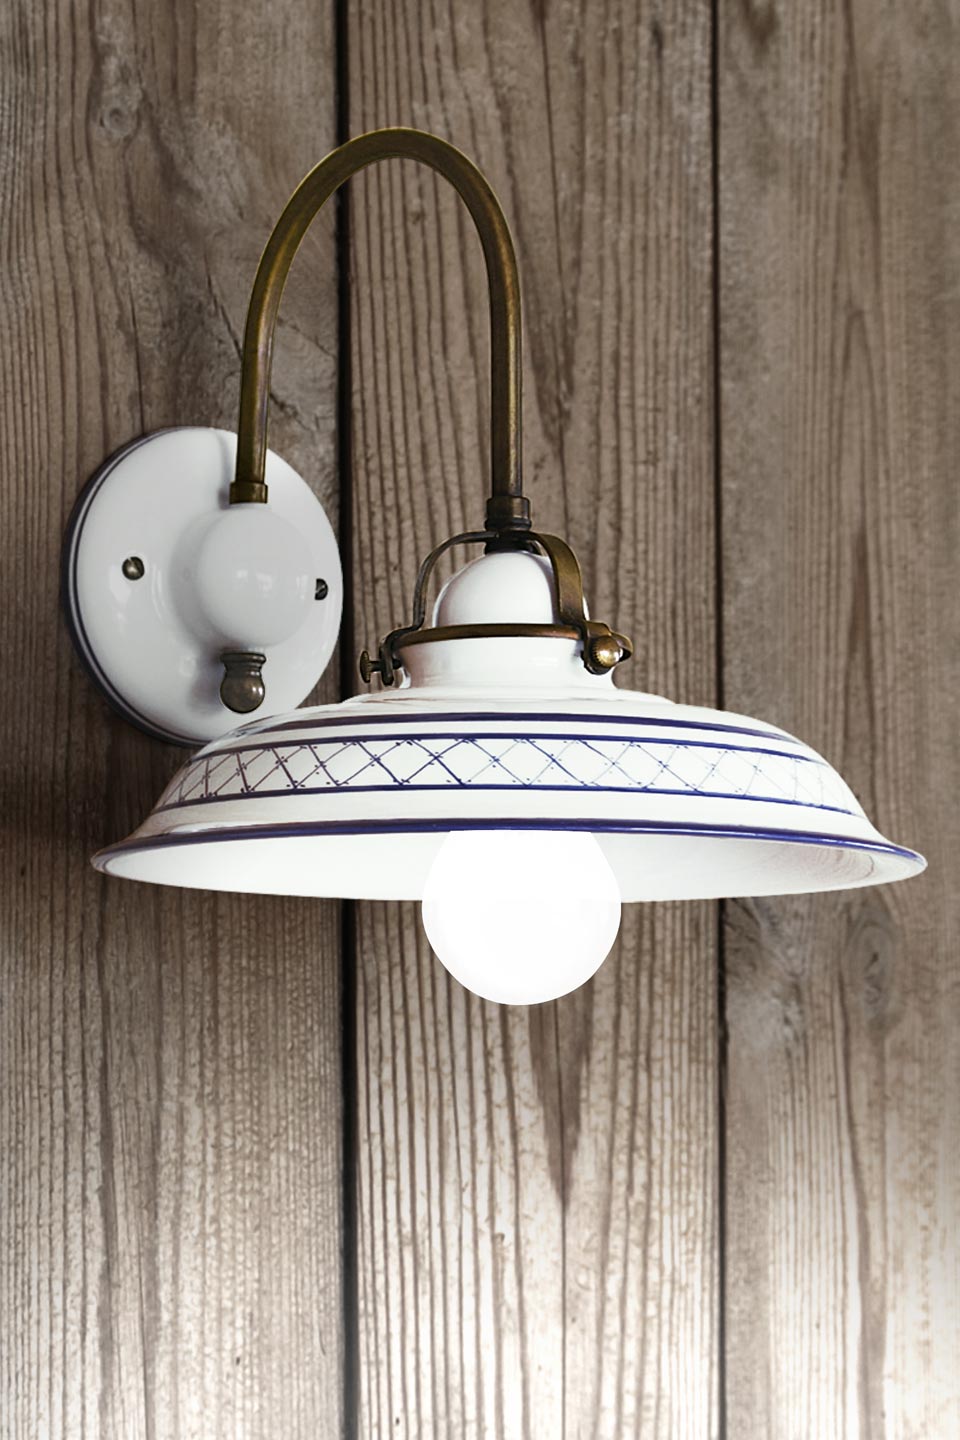 Wall lamp with blue crosses and border Provence style in white porcelain. Aldo Bernardi. 